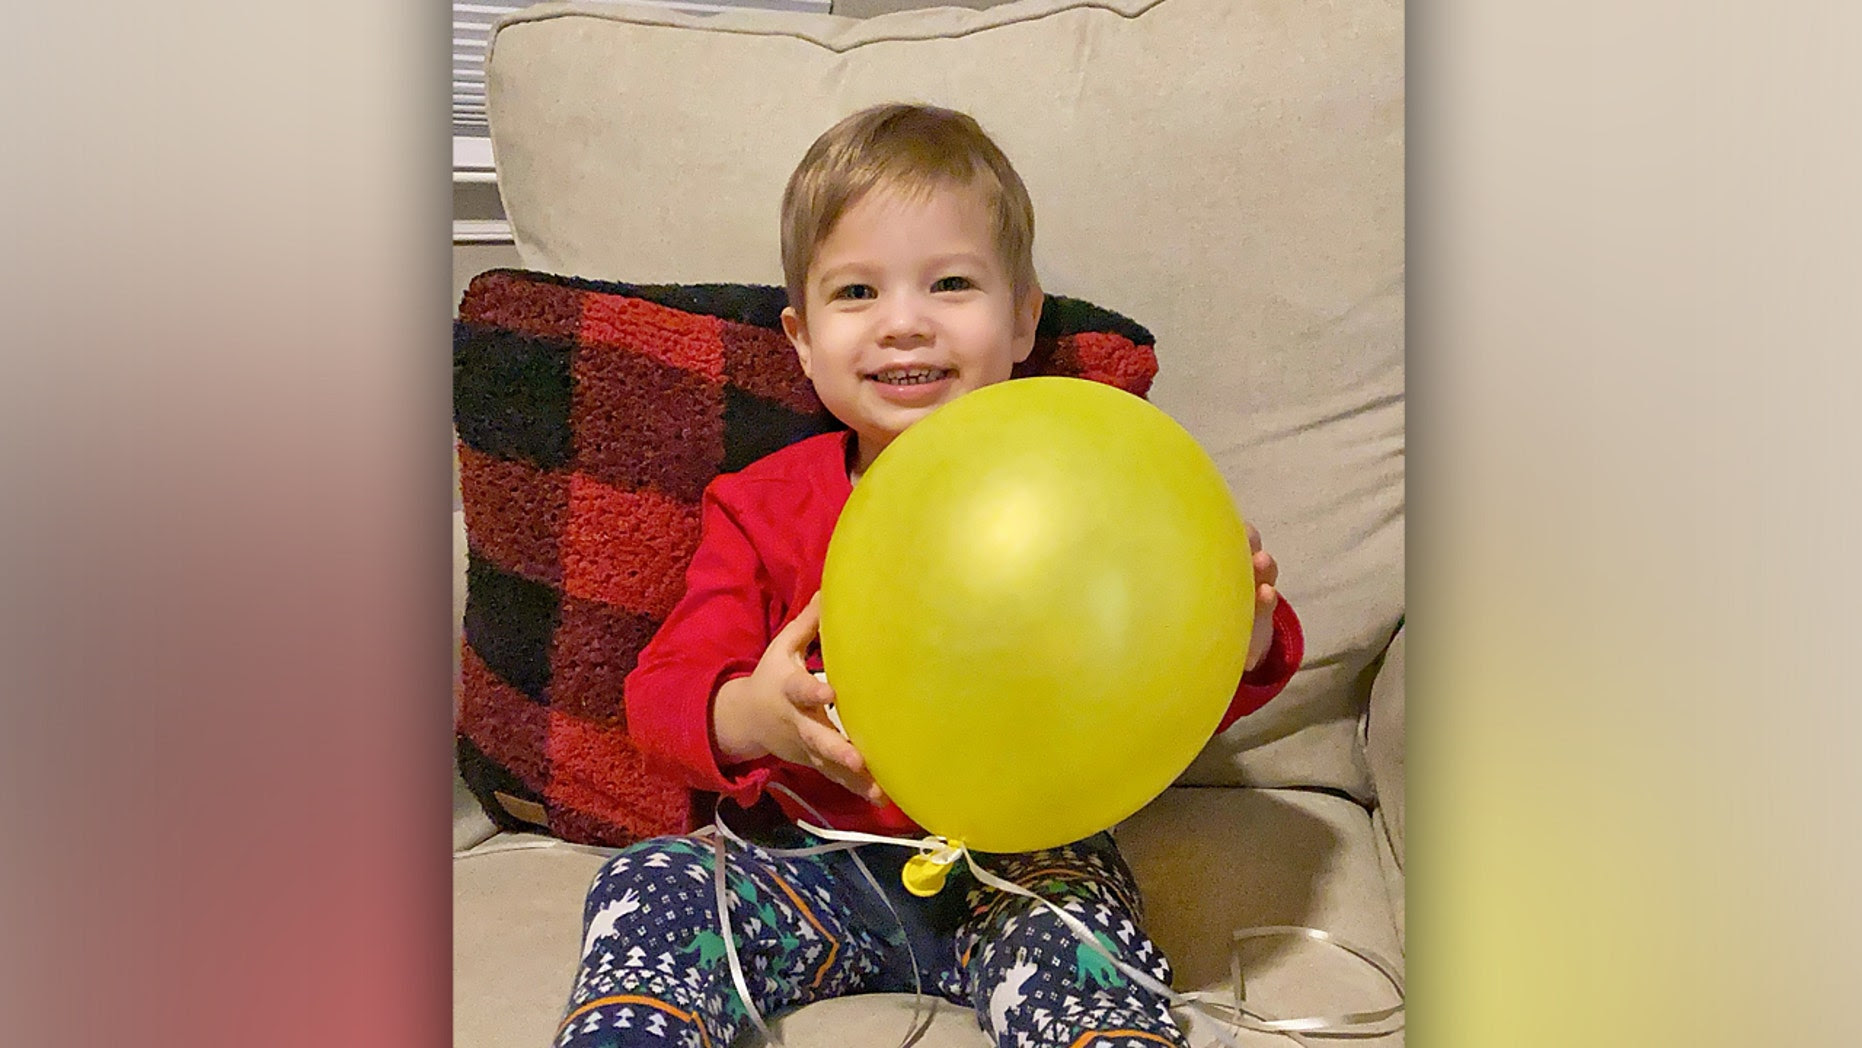 'Yellow Balloon Challenge' in West Virginia goes viral with acts of kindness